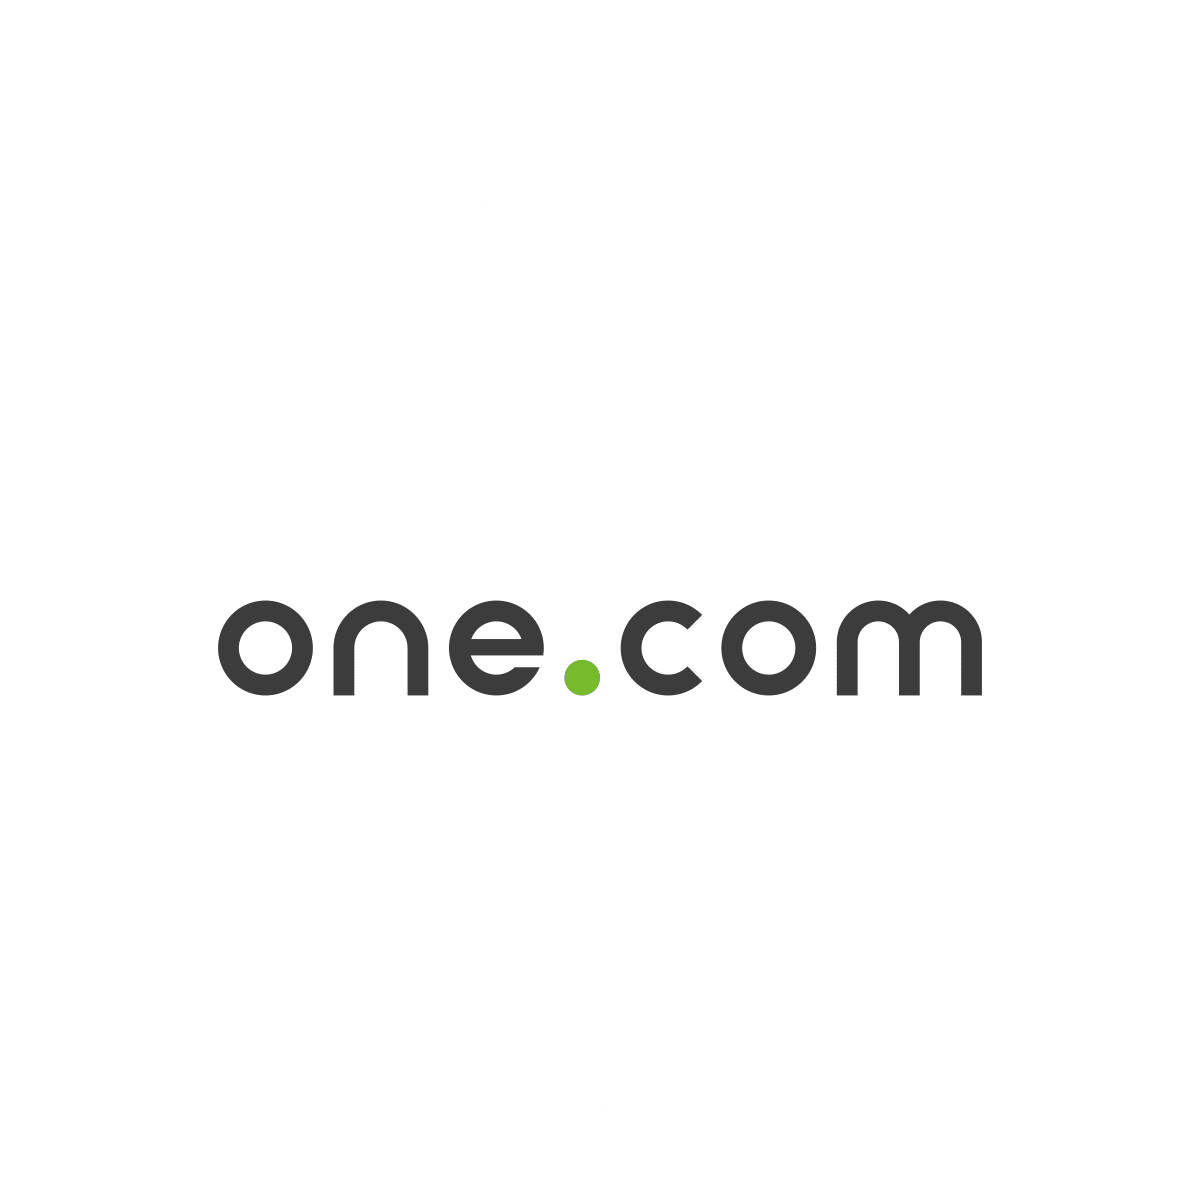 one.com now a cookie information partner - get cookie banner for free if you use the Website Builder